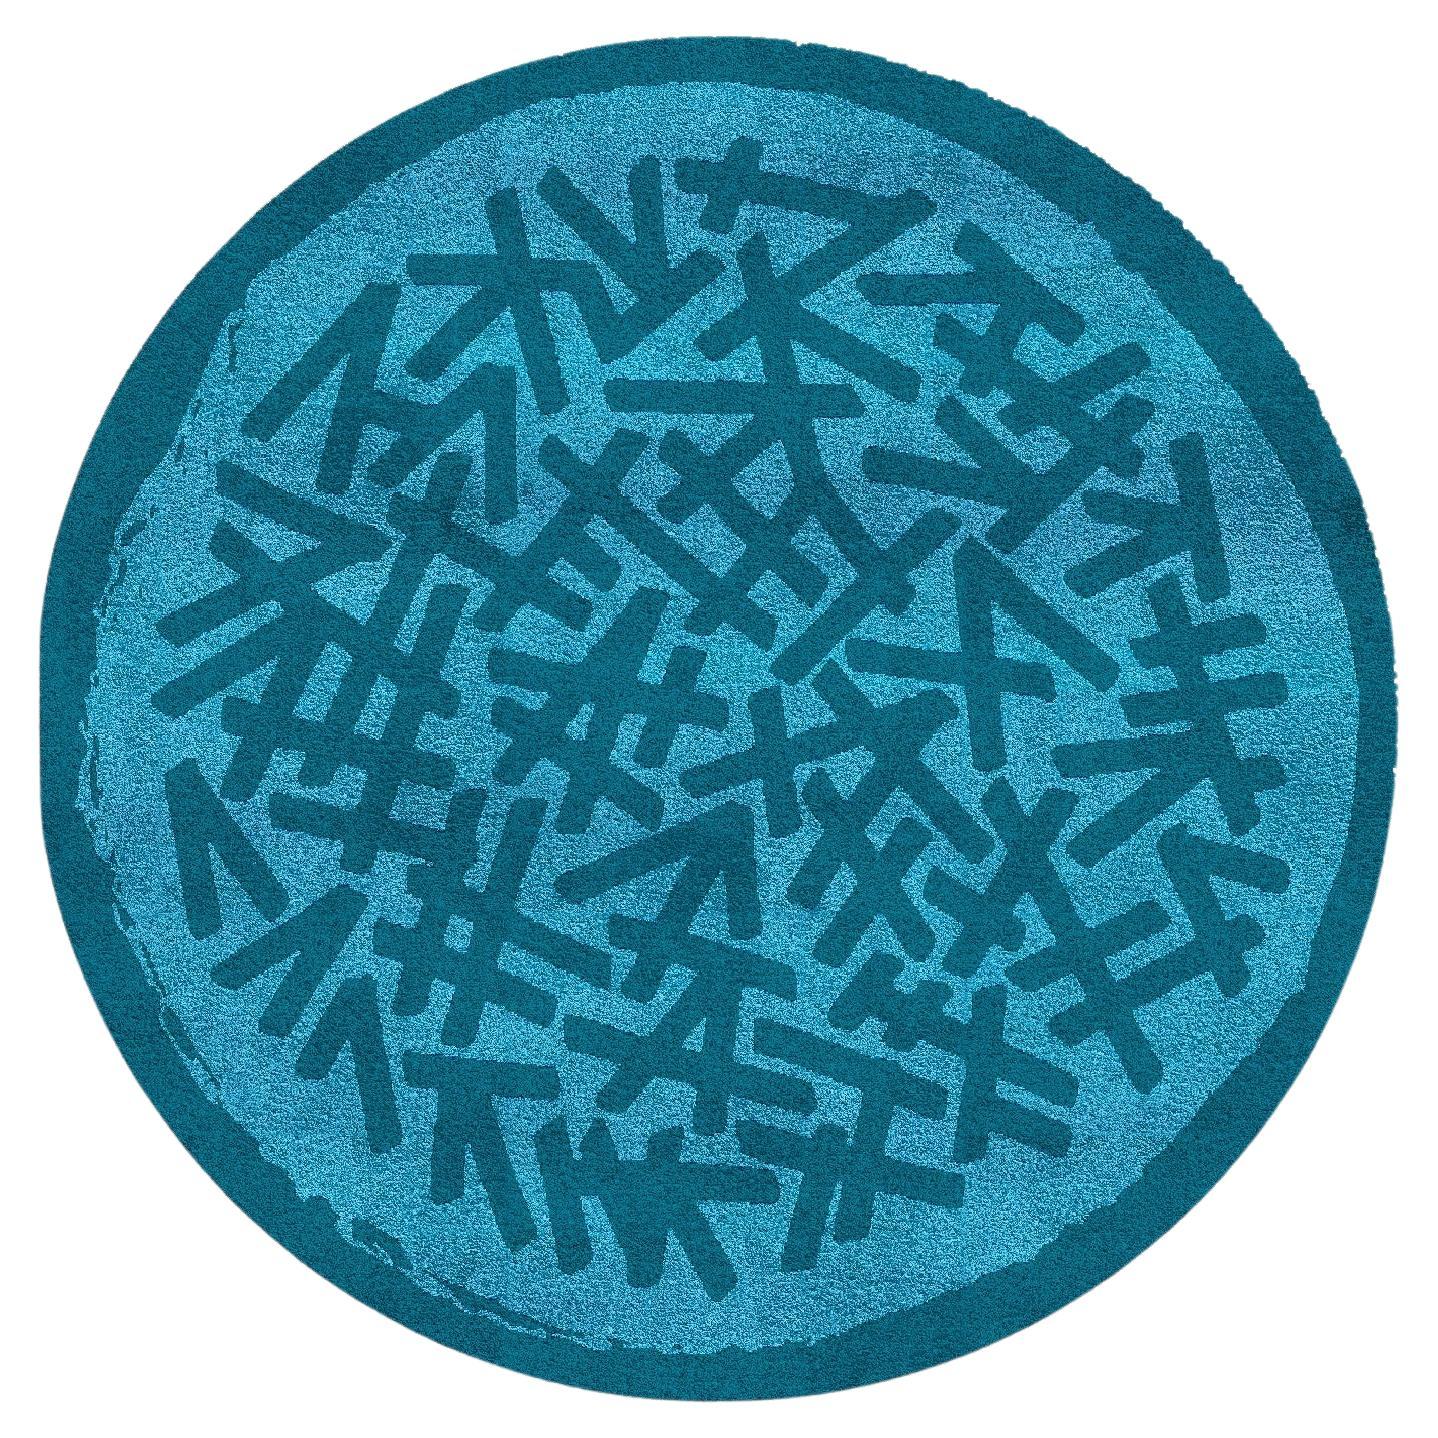 Circular Rug IV by Raul For Sale